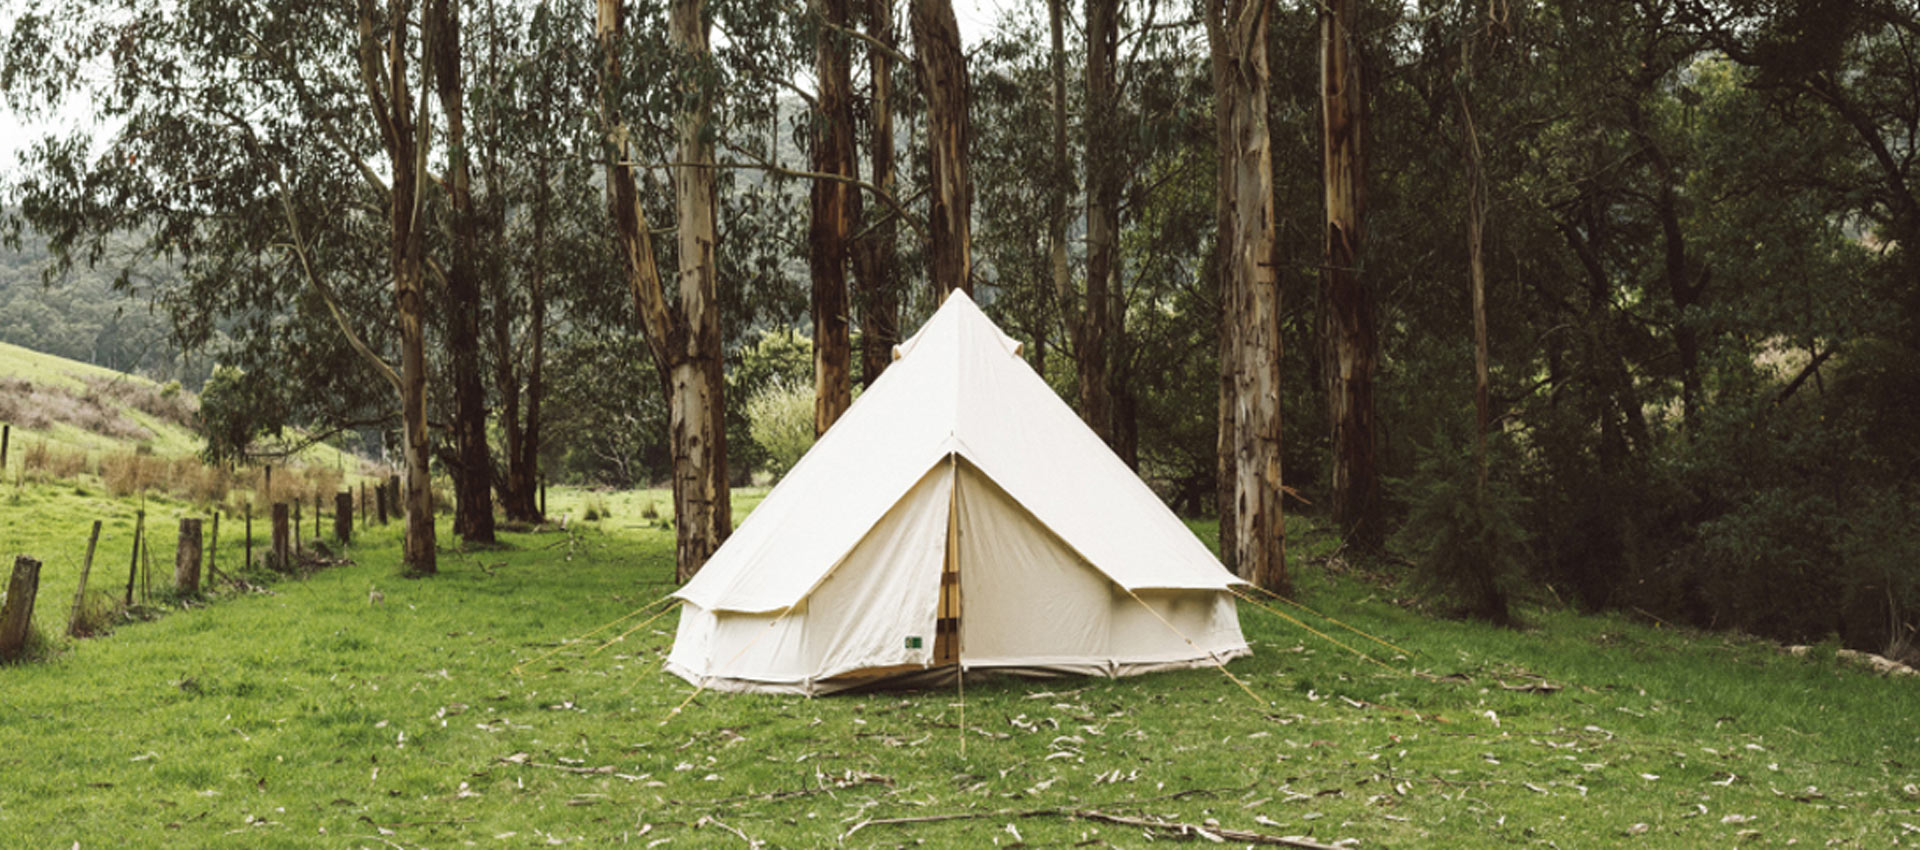 The 8 best camping for camping rookies - Visit Sunshine Coast